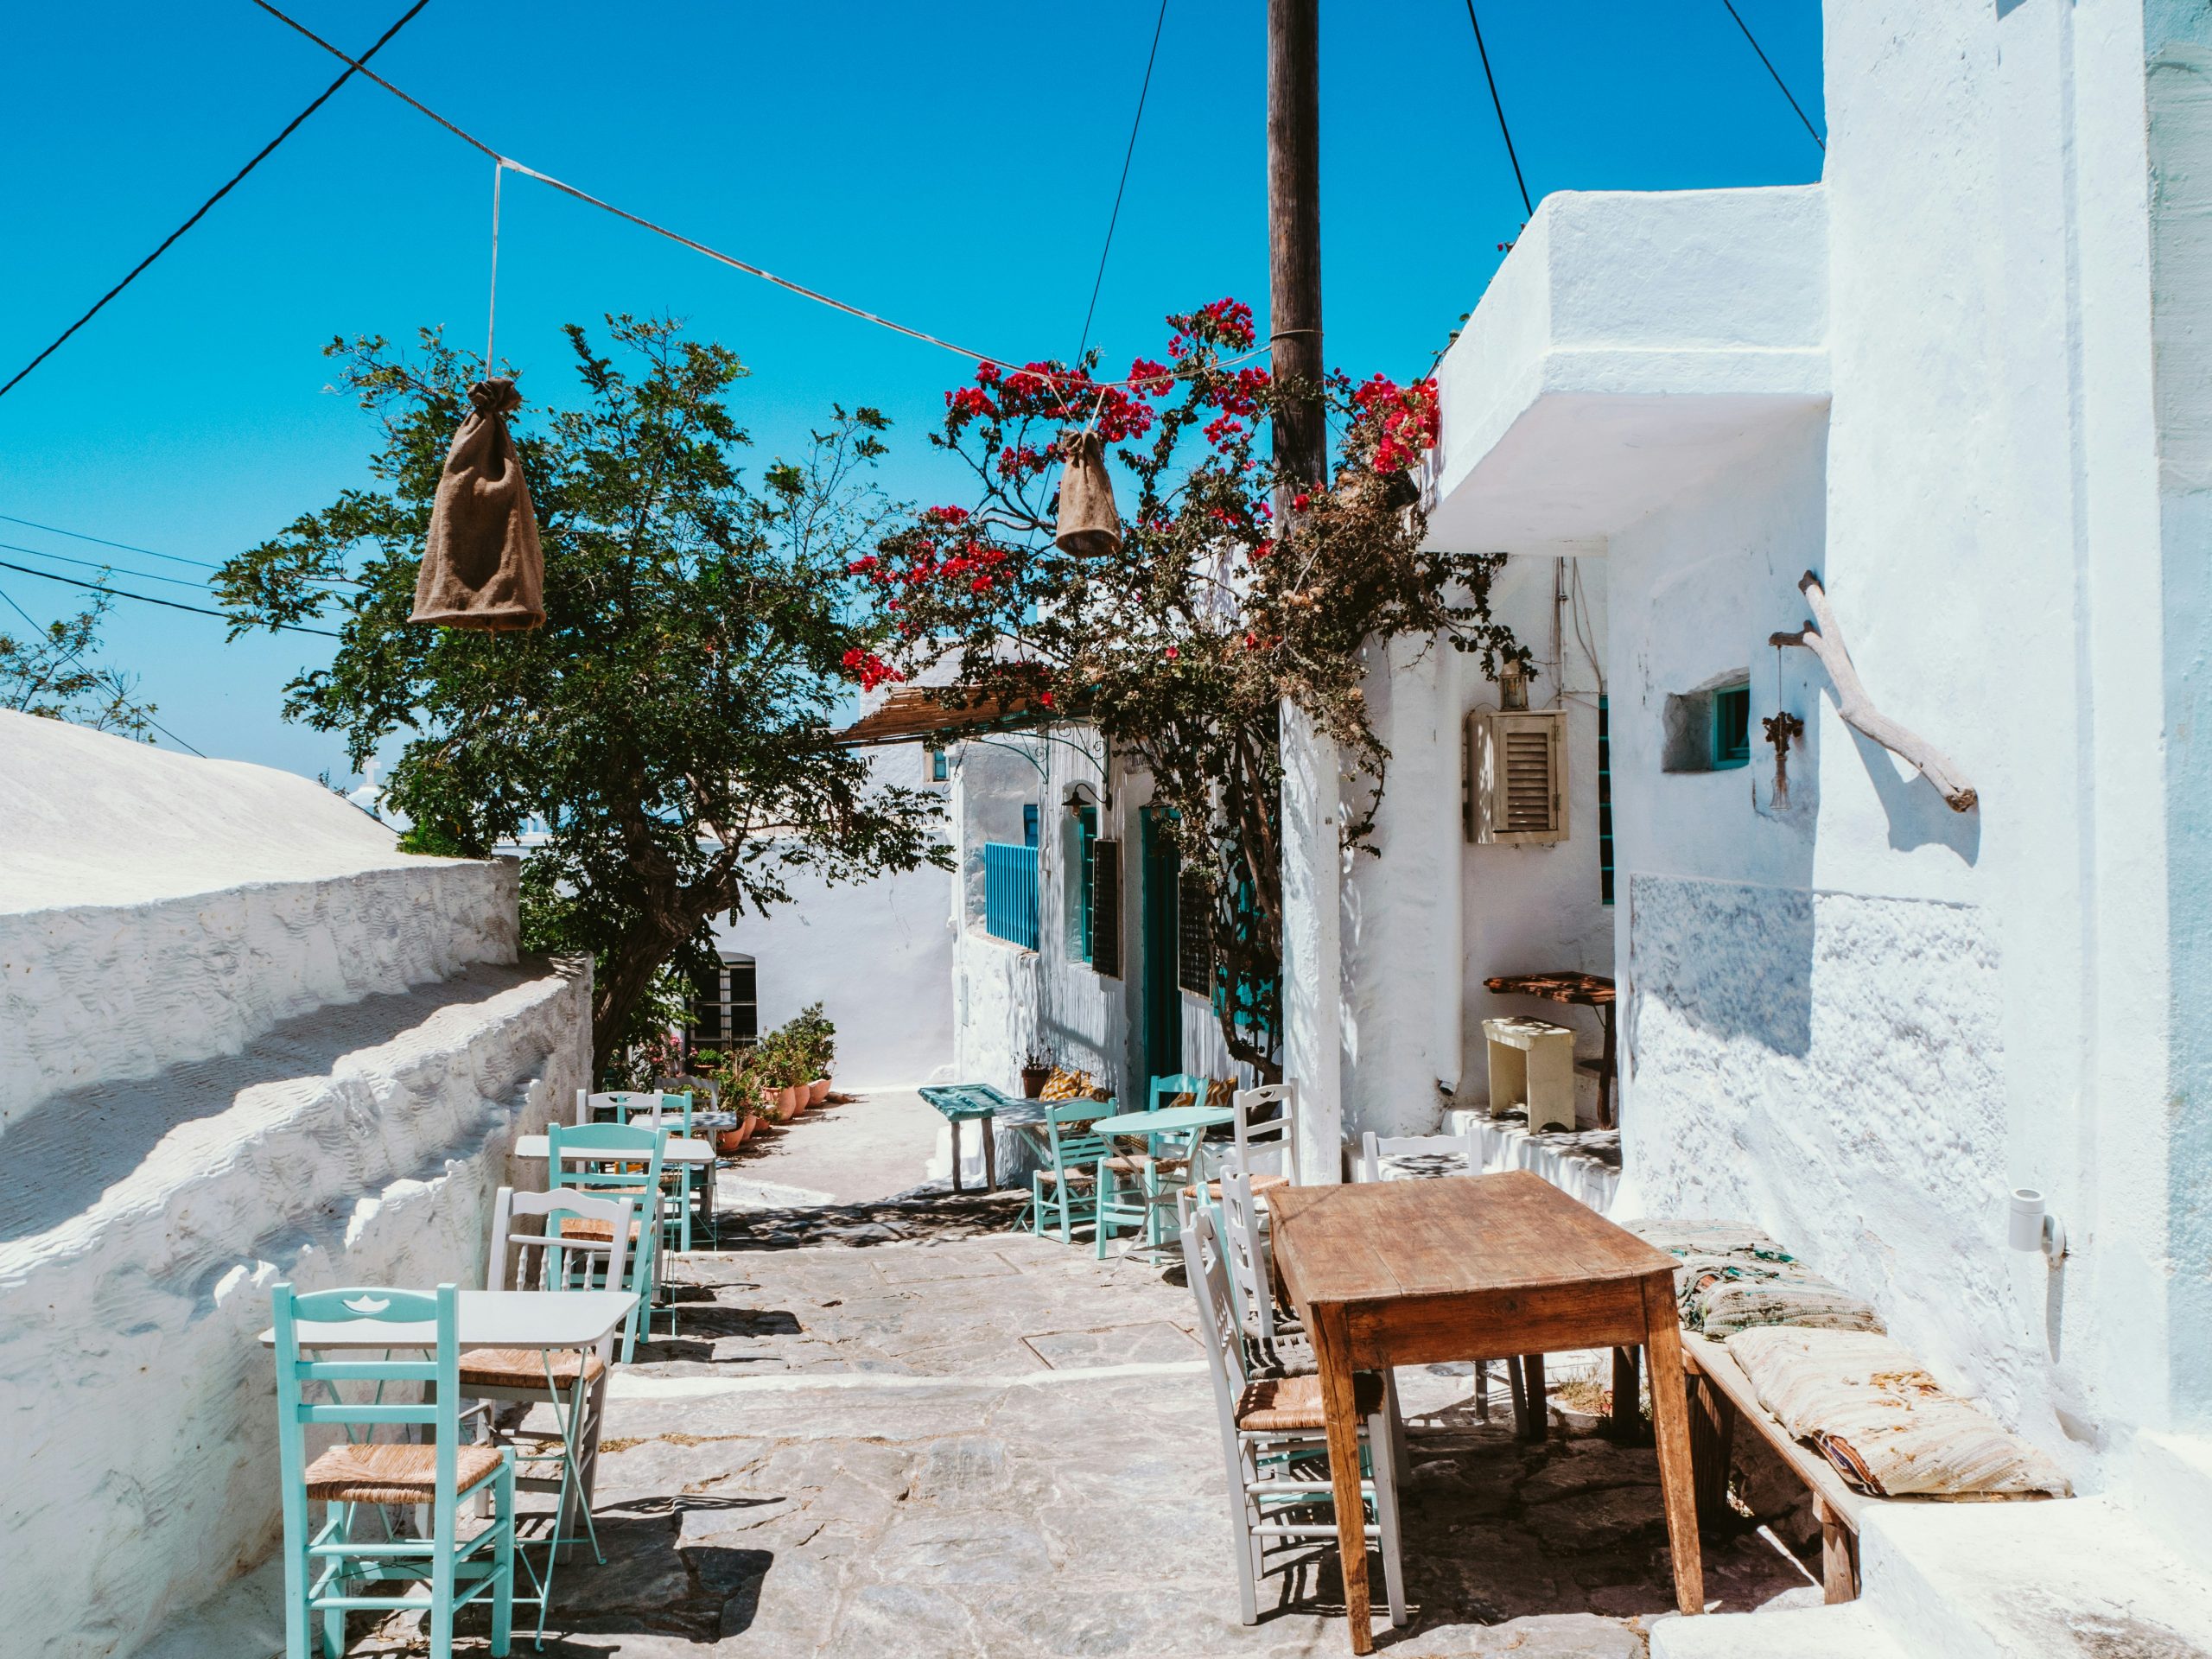 explore the beautiful greek islands and discover the stunning beaches, ancient ruins, and charming villages on your next vacation.